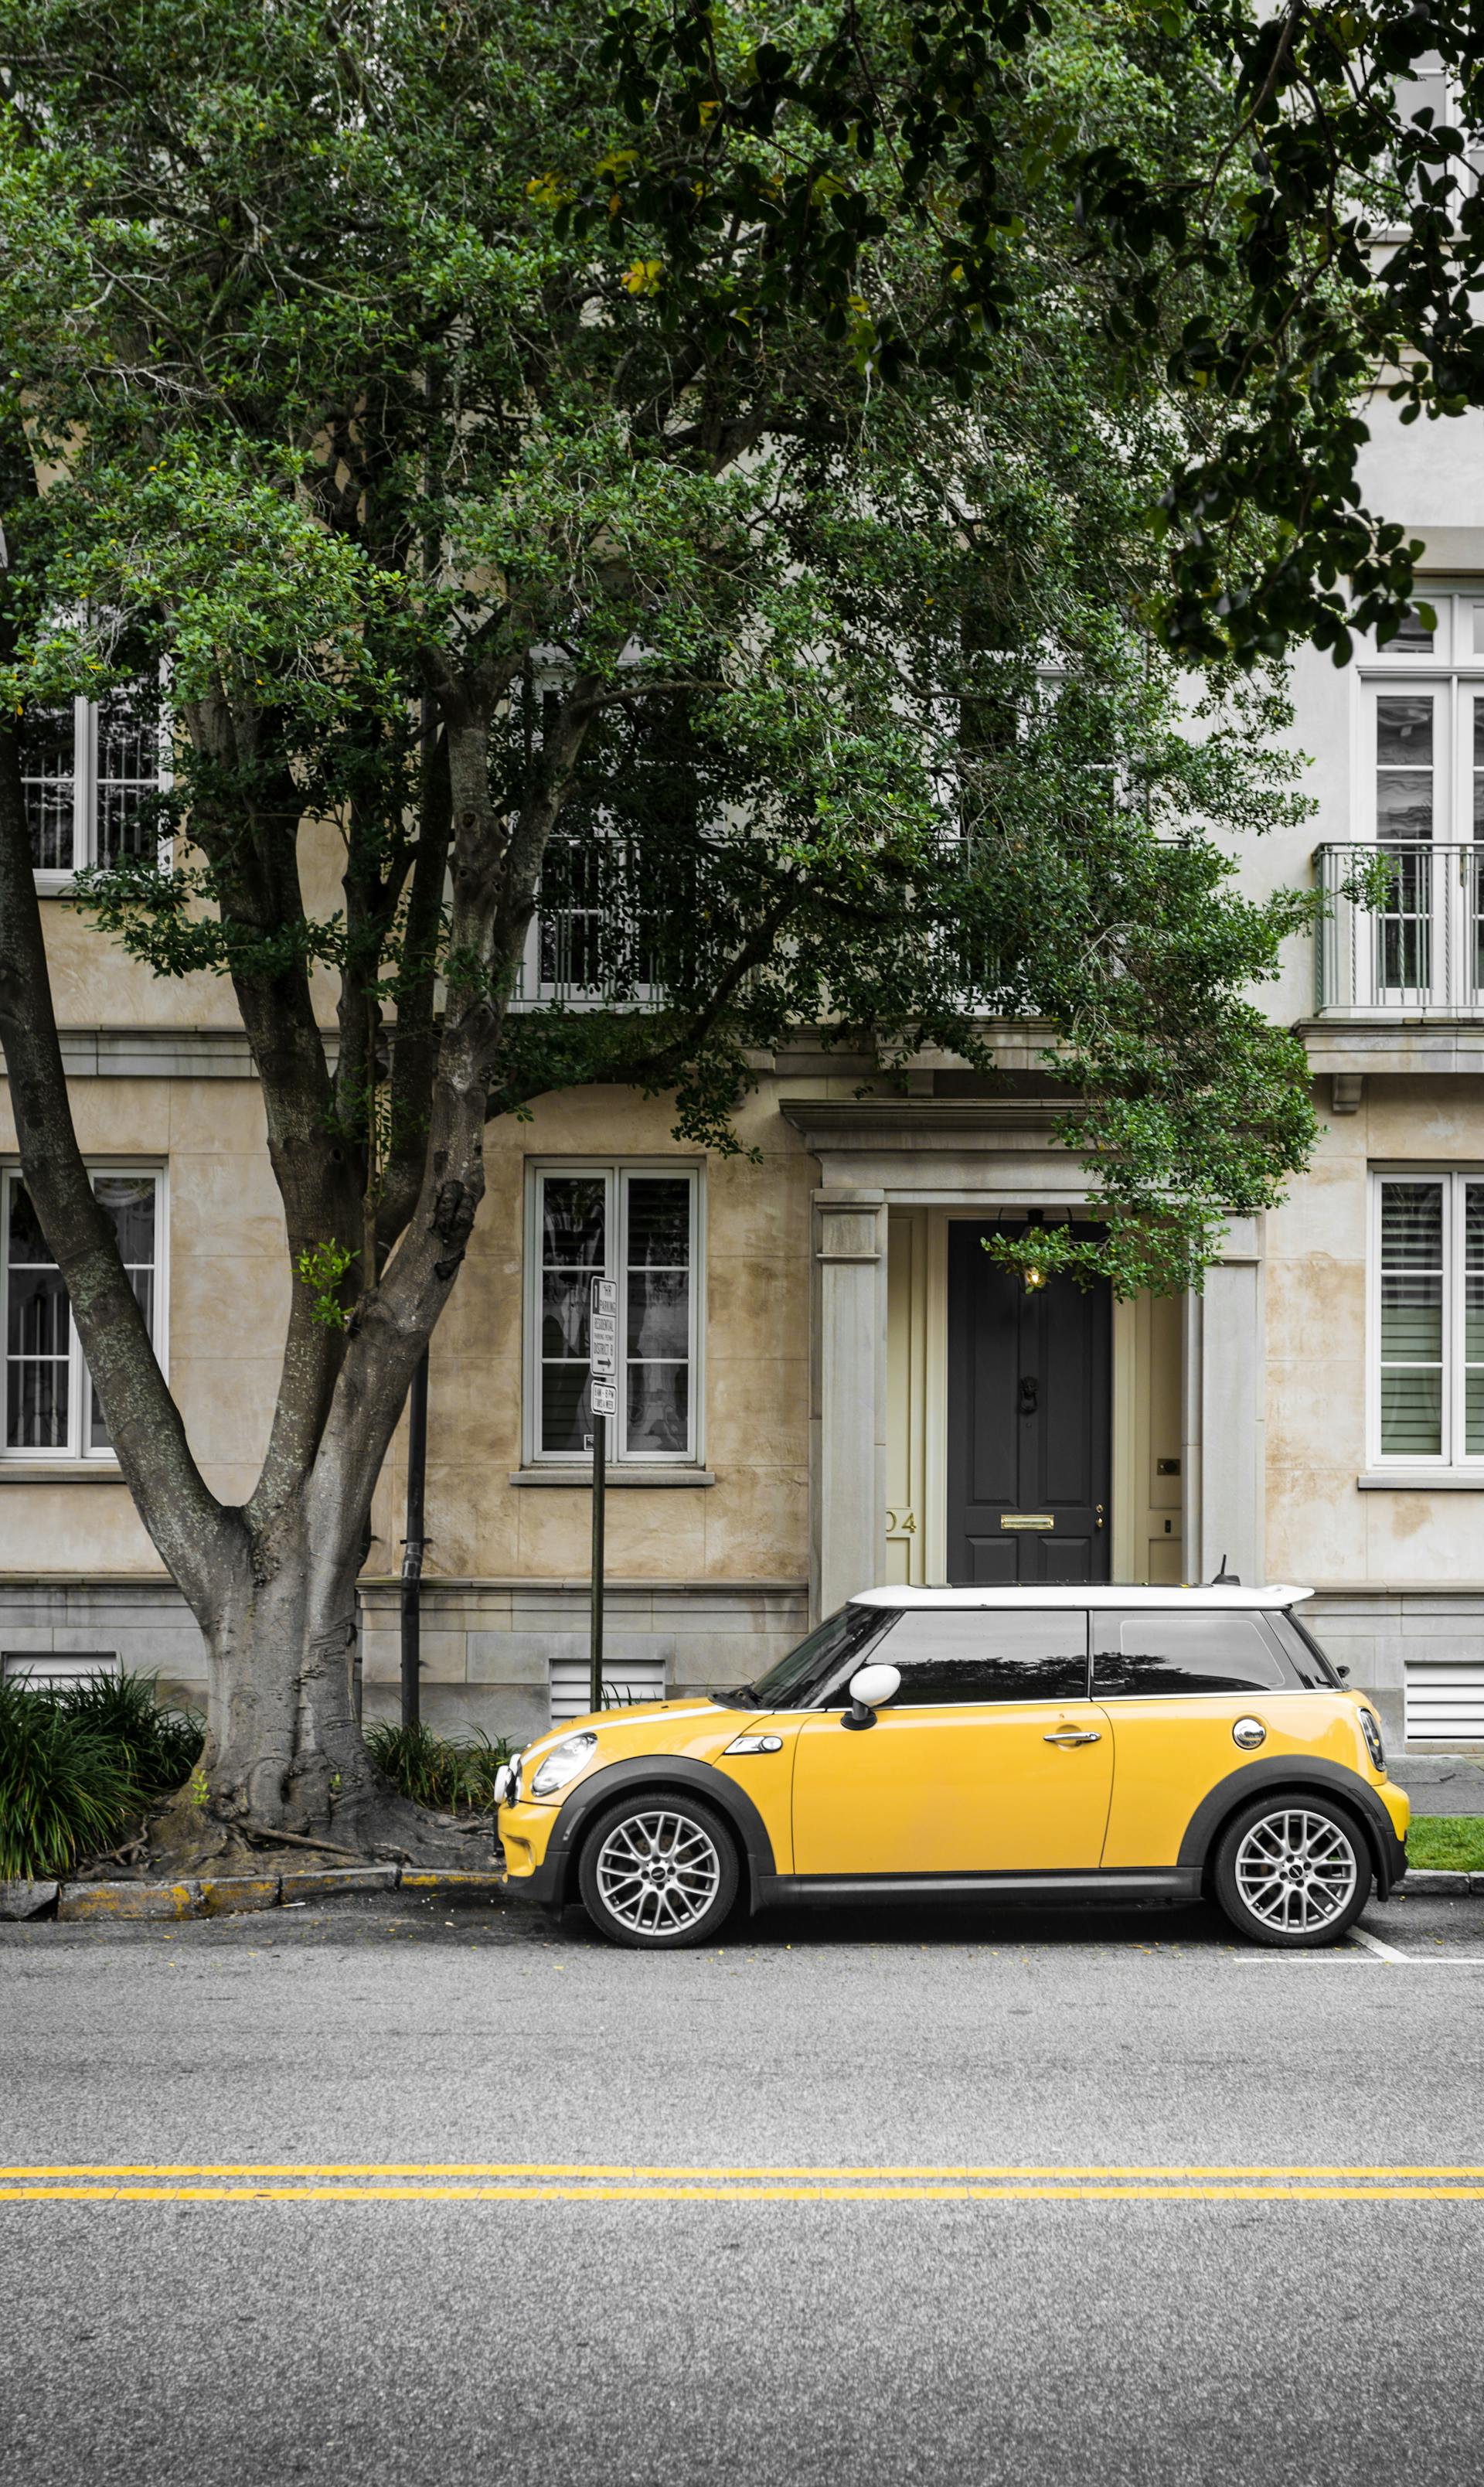 A yellow car parked alongside the road | Source: Pexels